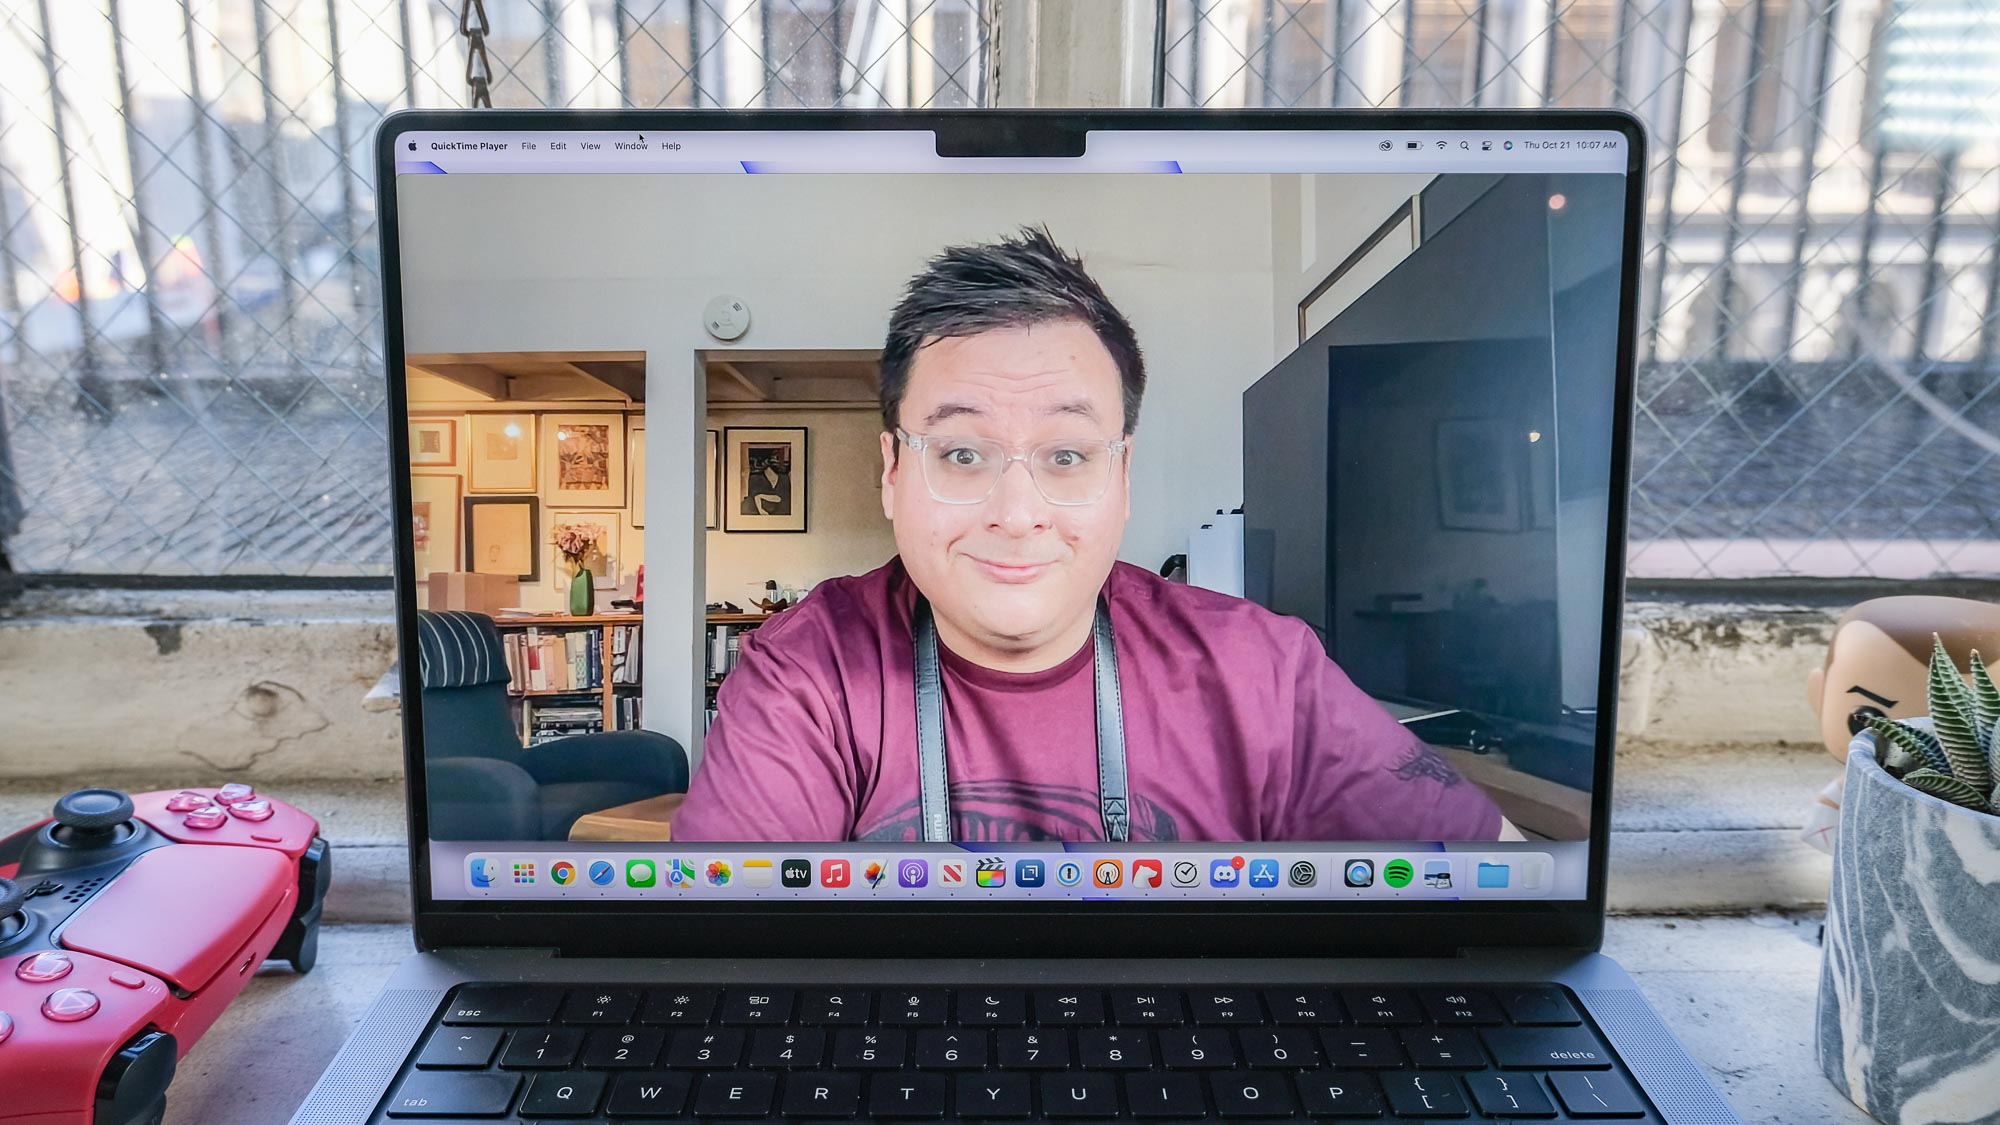 The MacBook Pro 2021 (14-inch) on a desk showing an image captured via the webcam